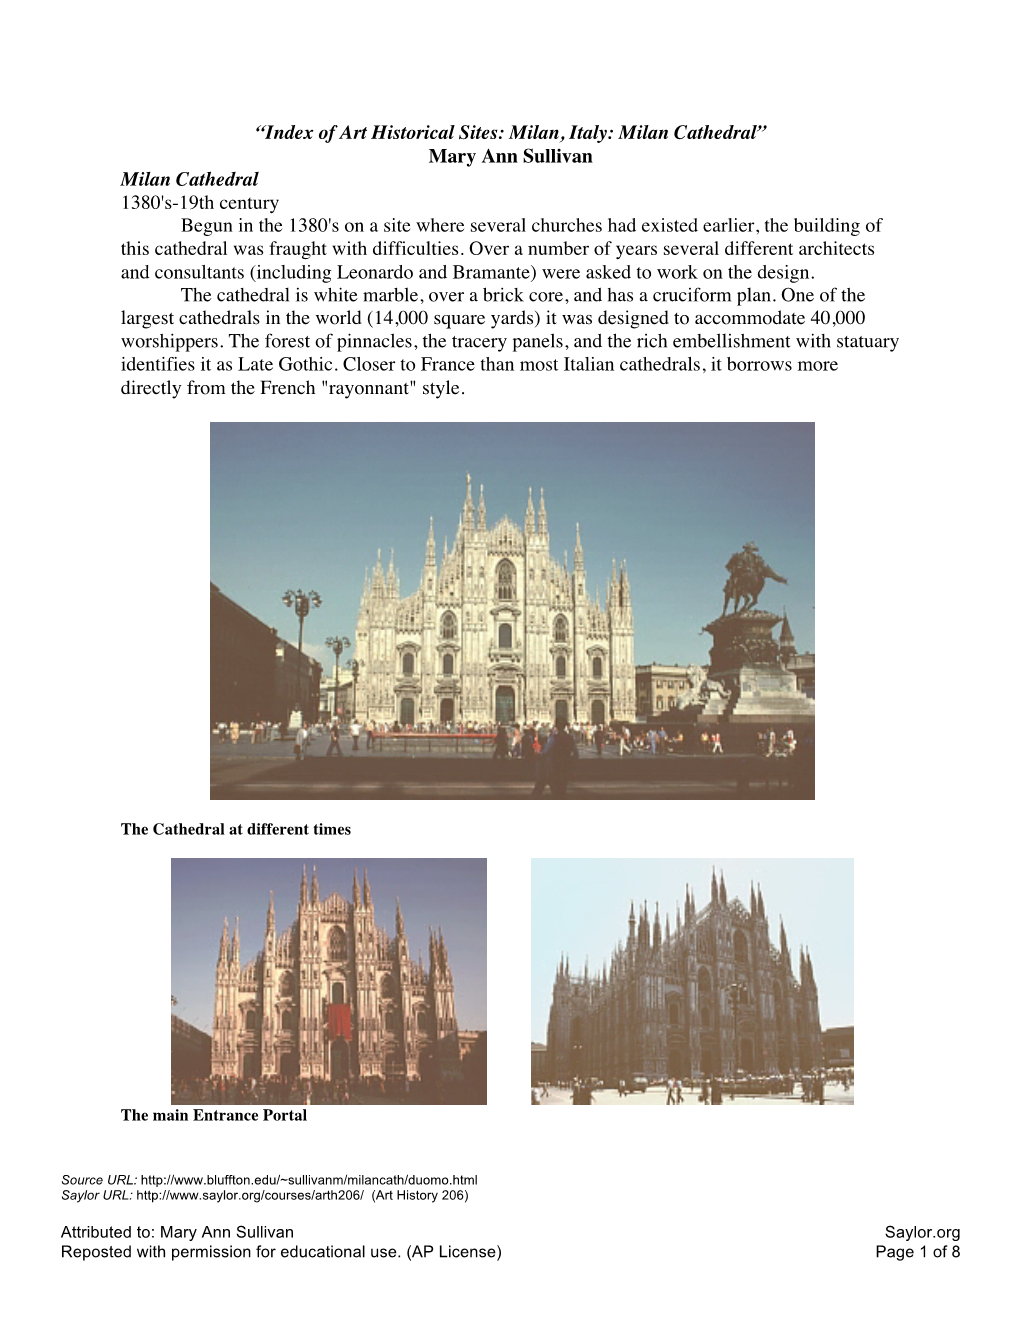 “Index of Art Historical Sites: Milan, Italy: Milan Cathedral” Mary Ann